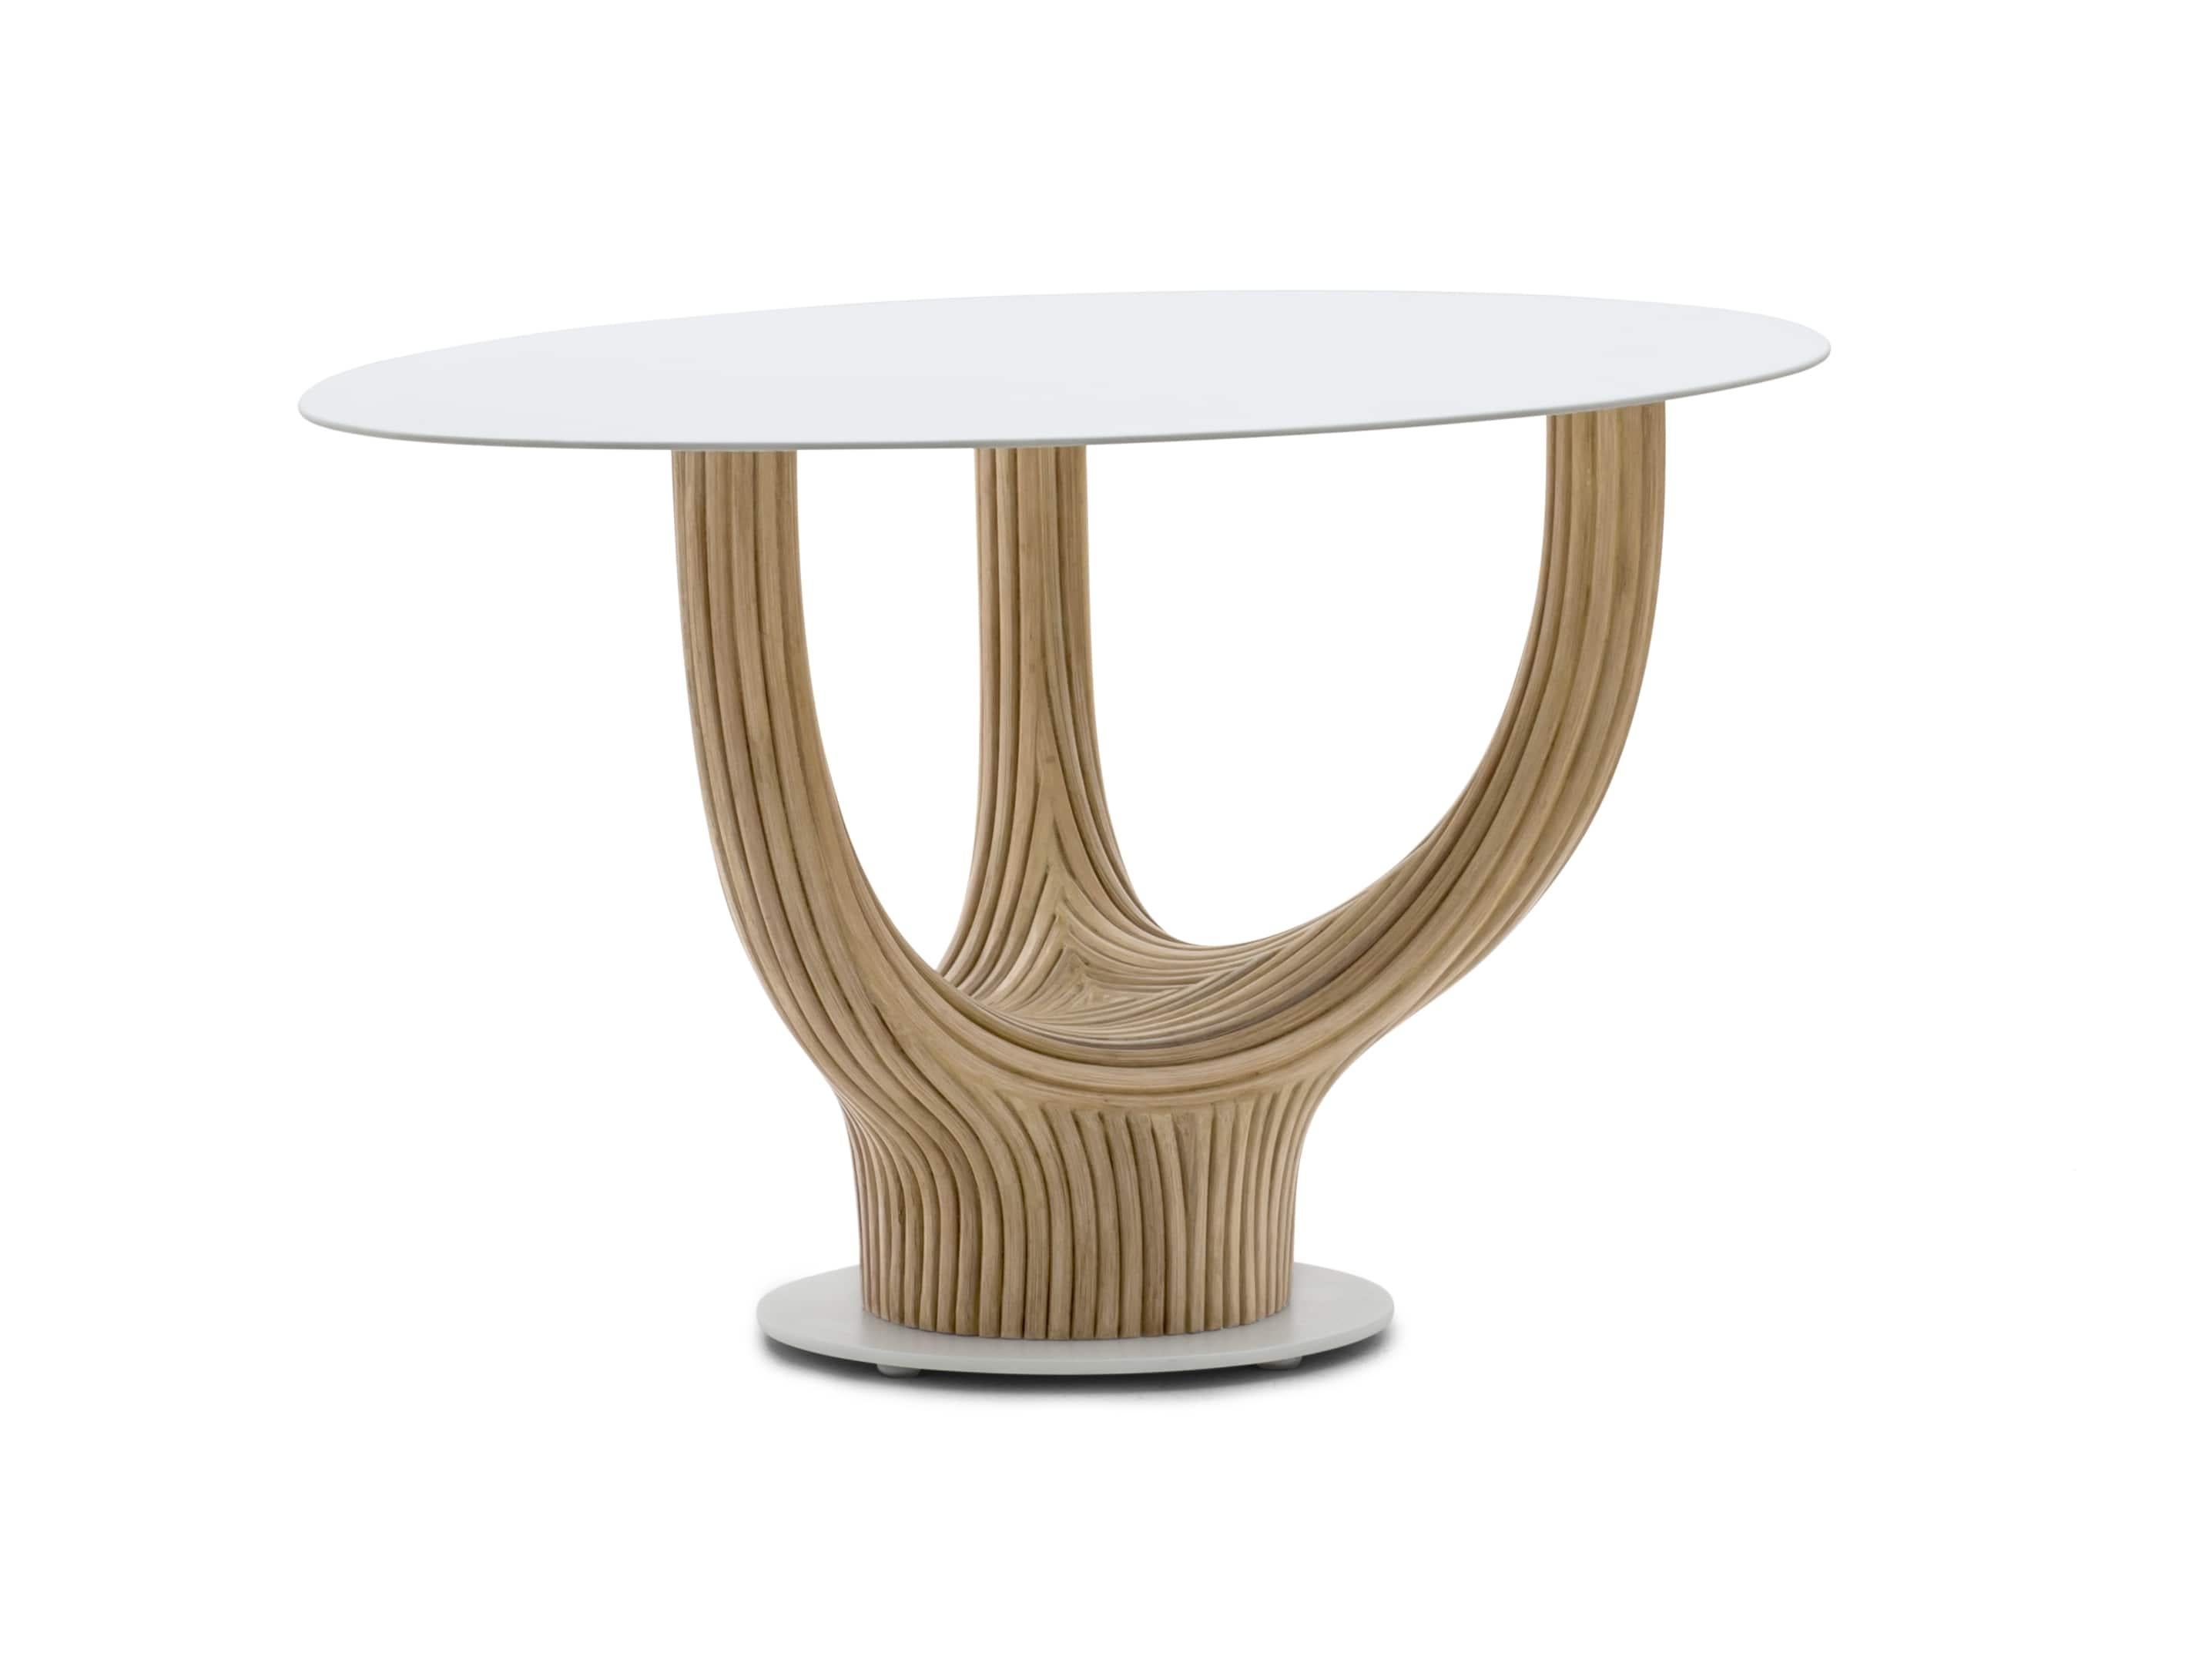 Acacia coffee table, Kenneth Cobonpue
Materials: Rattan, steel
Dimensions: D 56 x W 75 x H 41 cm

Kenneth Cobonpue is a multi-awarded furniture designer and manufacturer from Cebu, Philippines. His passage to design began in 1987, studying